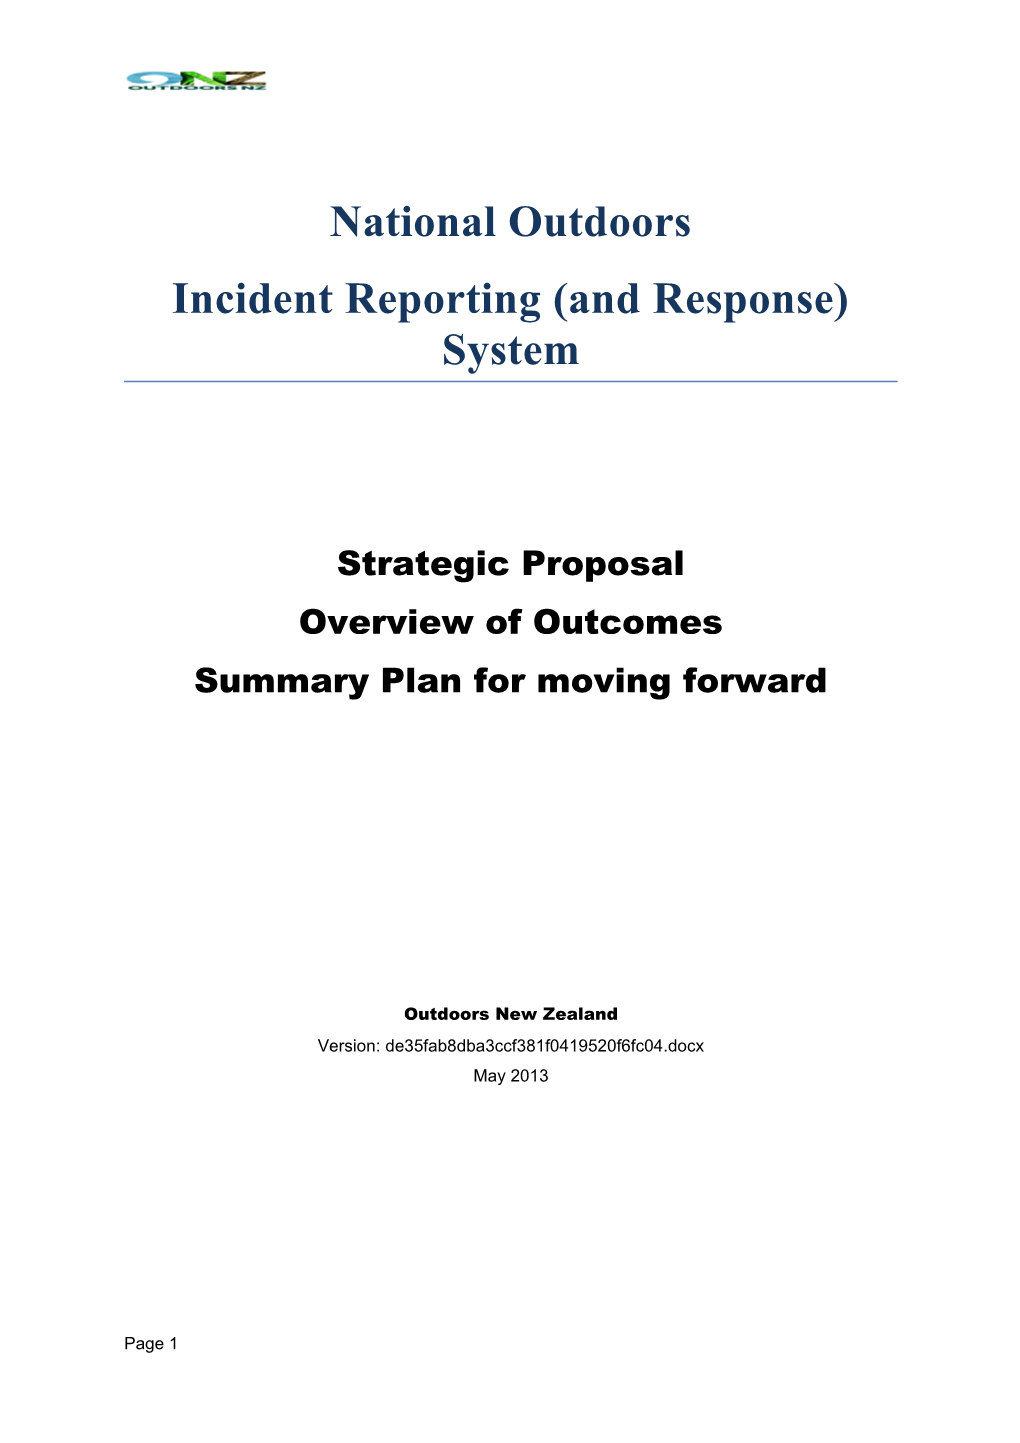 Incident Reporting (And Response) System